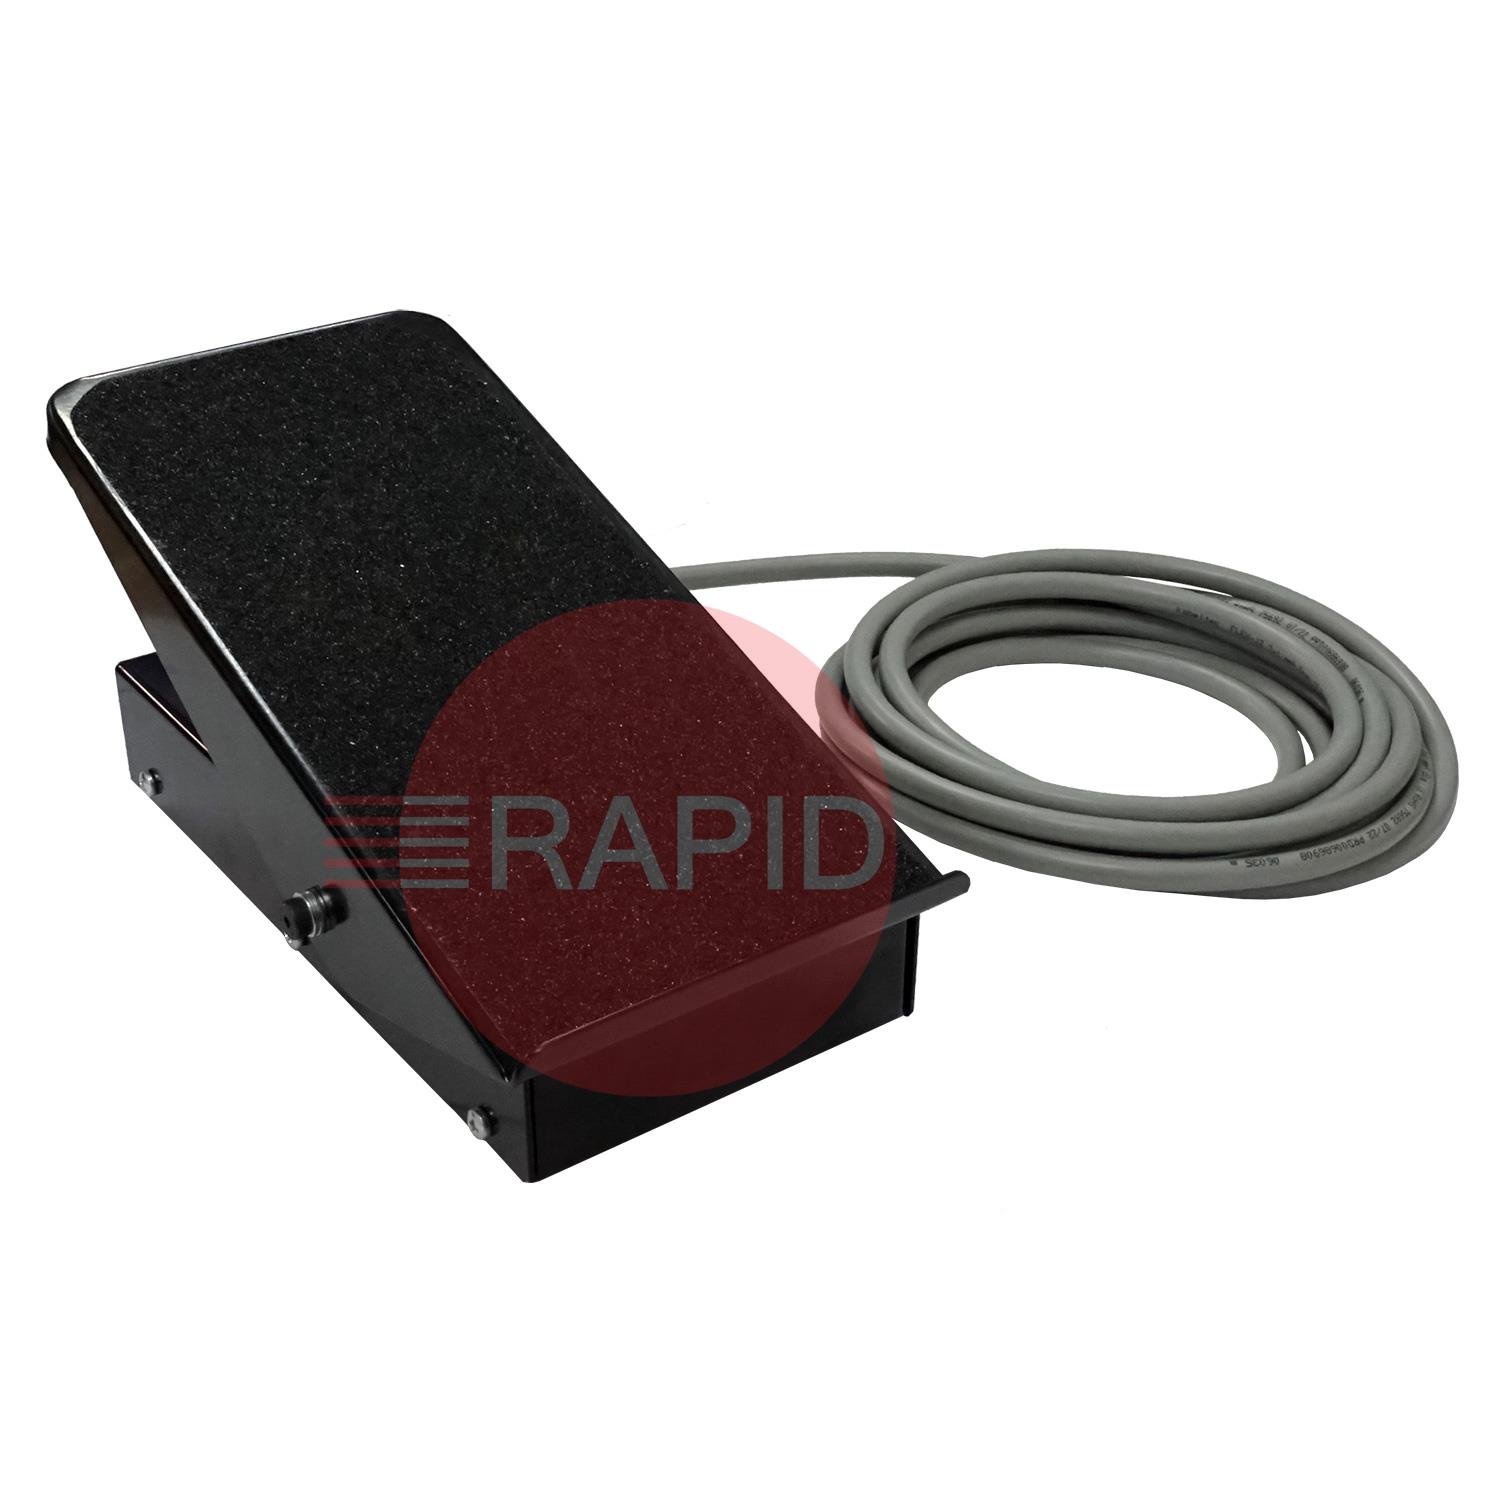 FST1801  Thermal Arc Footpedal For LM300, GTS Models, Etc. Footpedal c/w 8 Pin Plastic Cable Plug